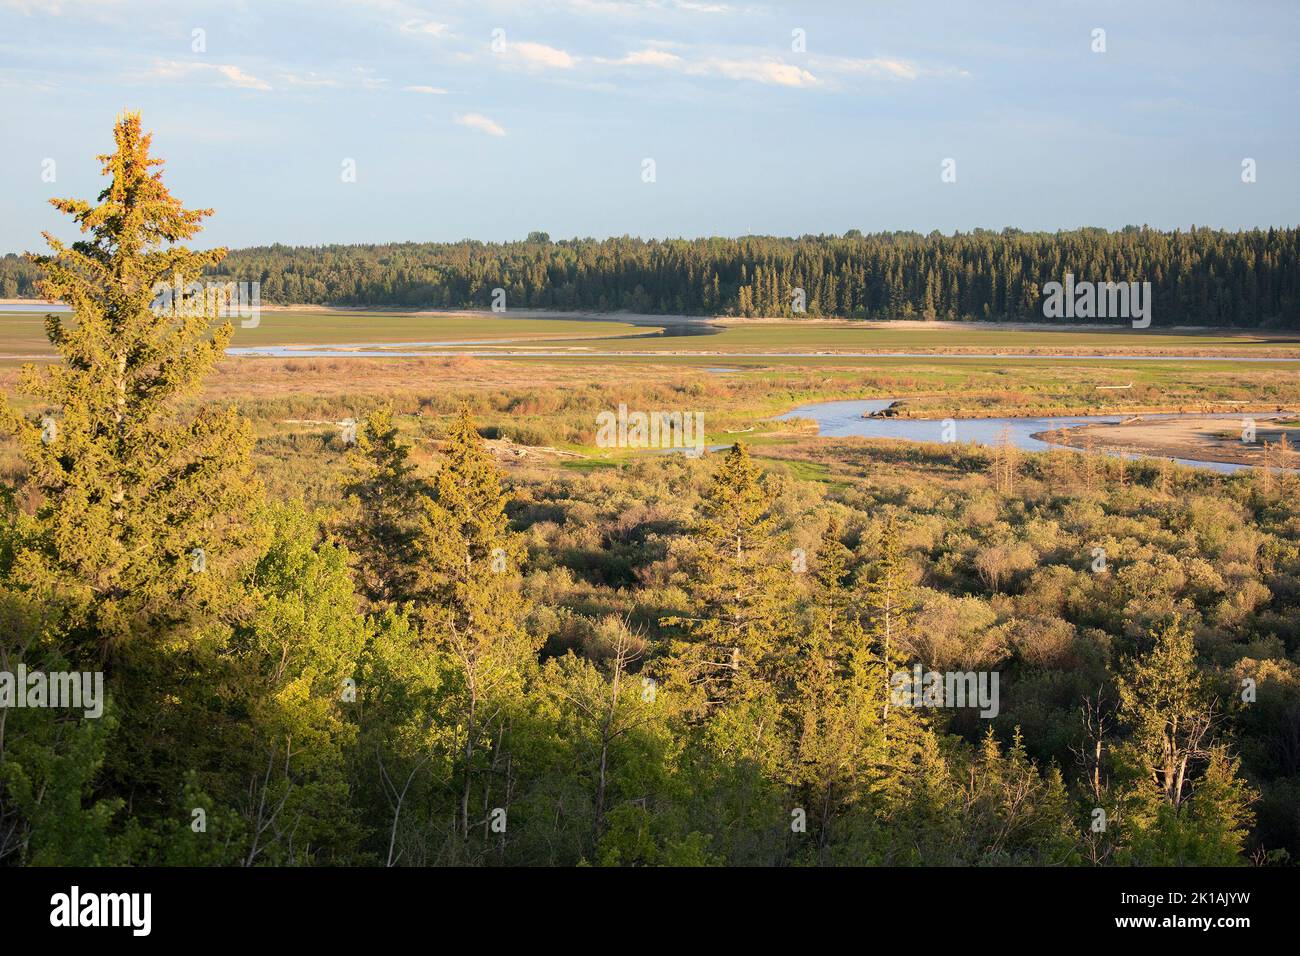 Weaselhead Flats, a nature park in Calgary, Alberta, Canada. View of delta where Elbow River flows into Glenmore Reservoir, and White Spruce forest Stock Photo